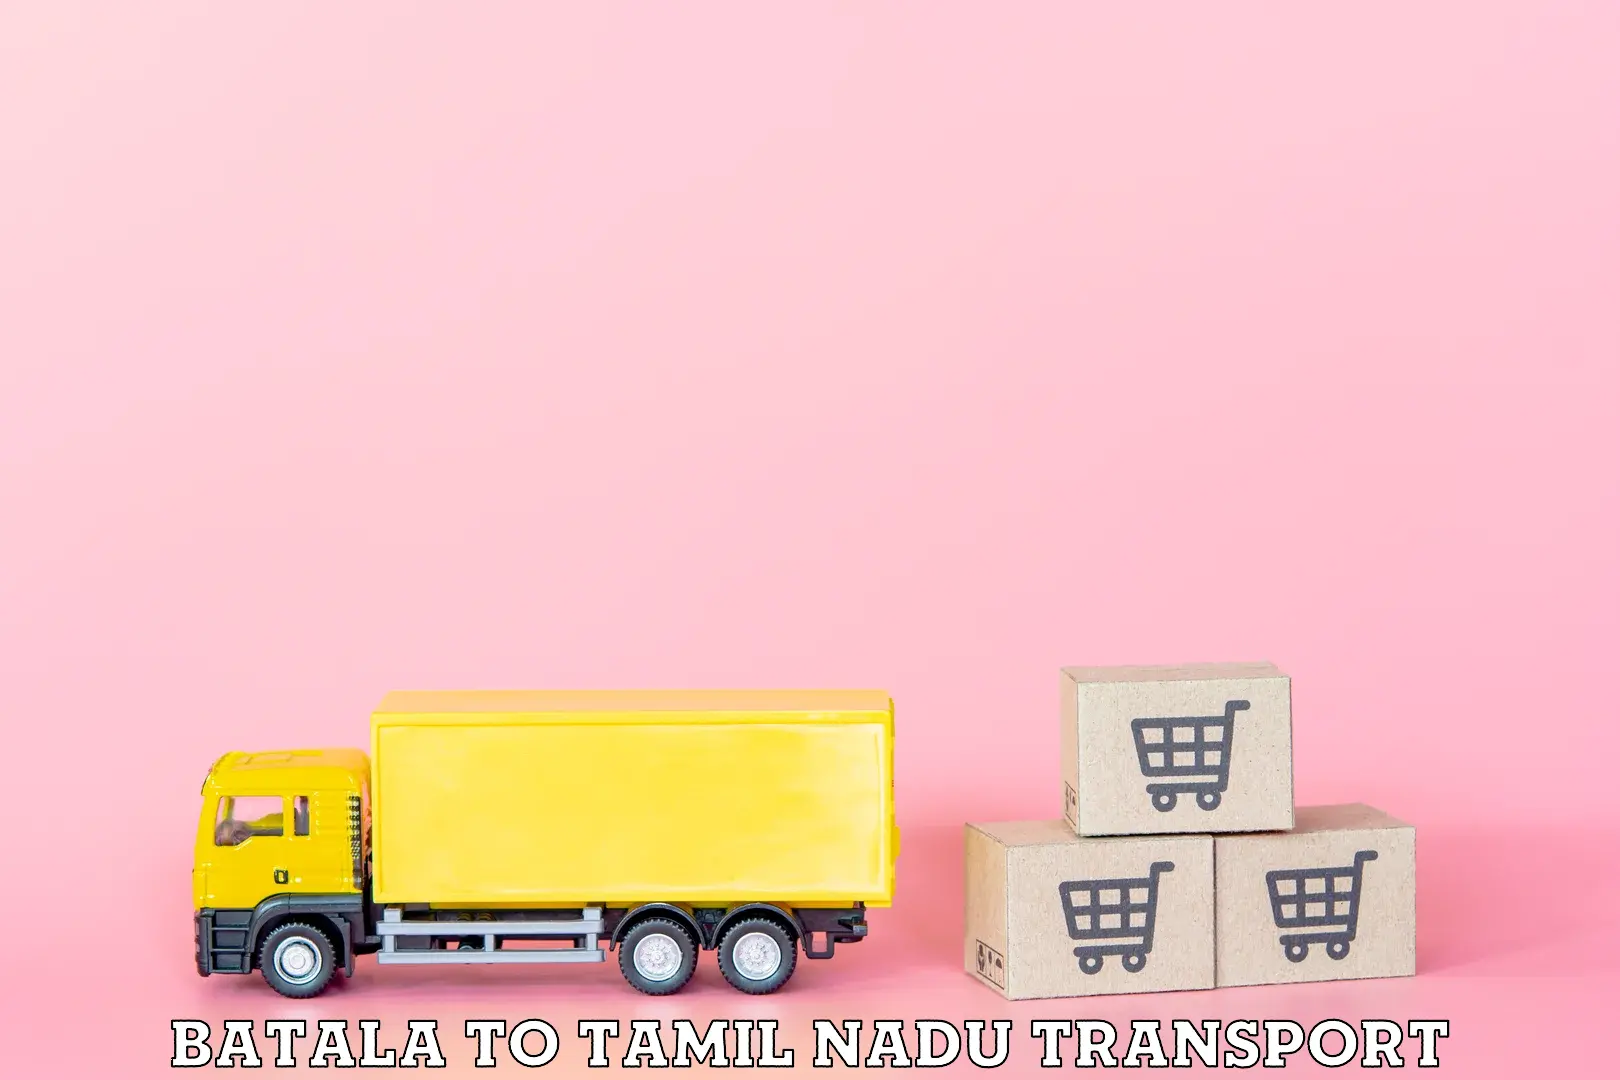 Online transport service Batala to Nagercoil